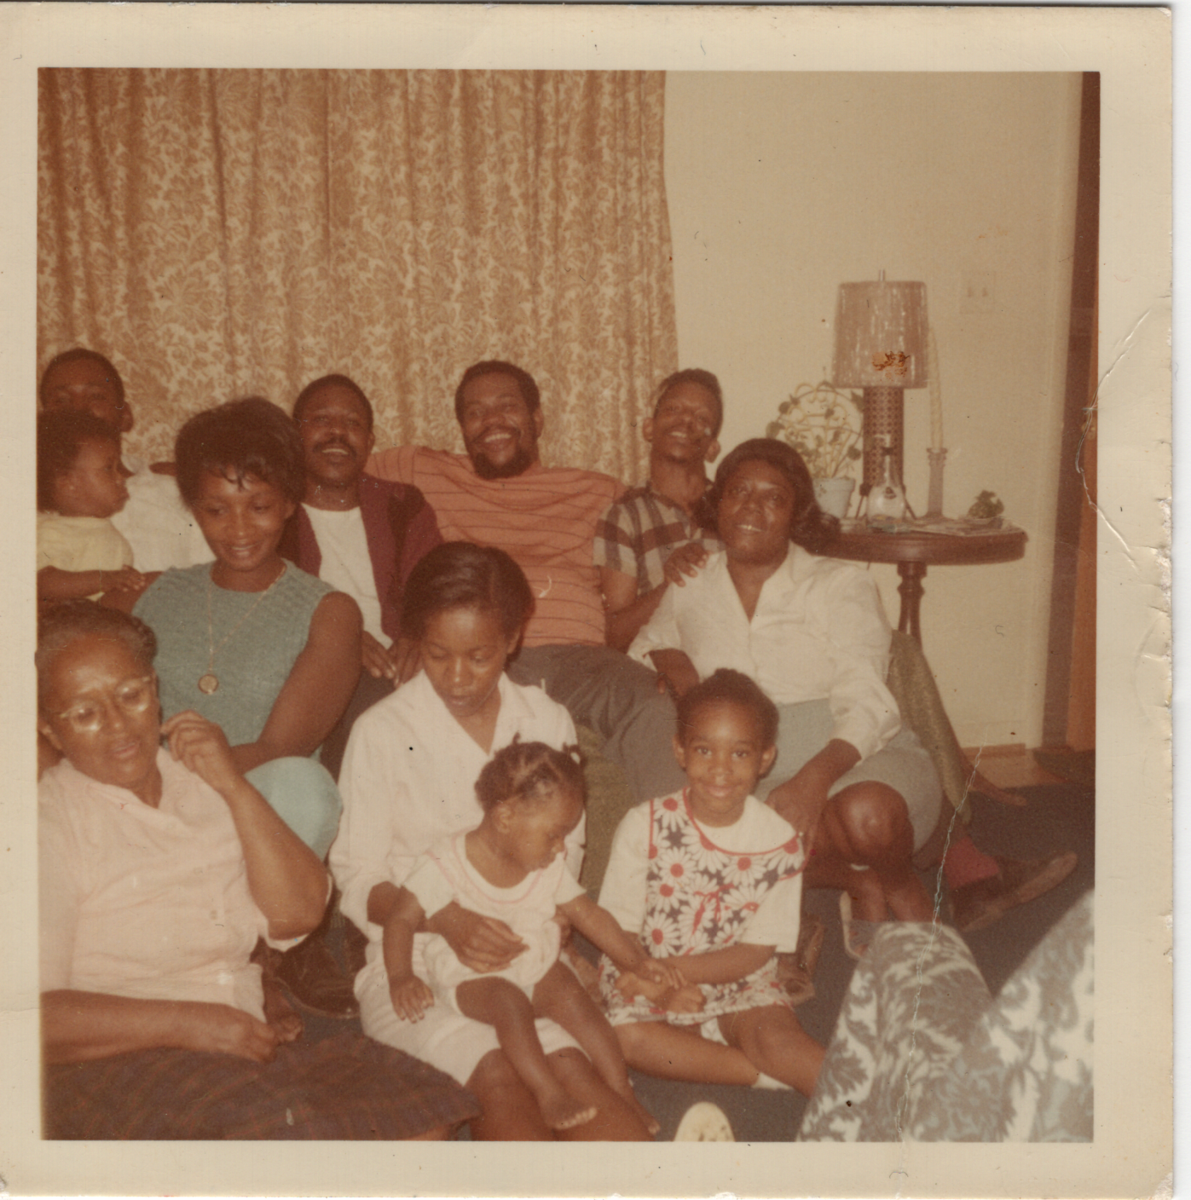 Sep 21 1968 - photo of donor's mother on bottom left surrounded by family. From left to right bottom row: Osceola sr. and jr., Moses jr. and his wife Eleanor, and the rest are unknown names.